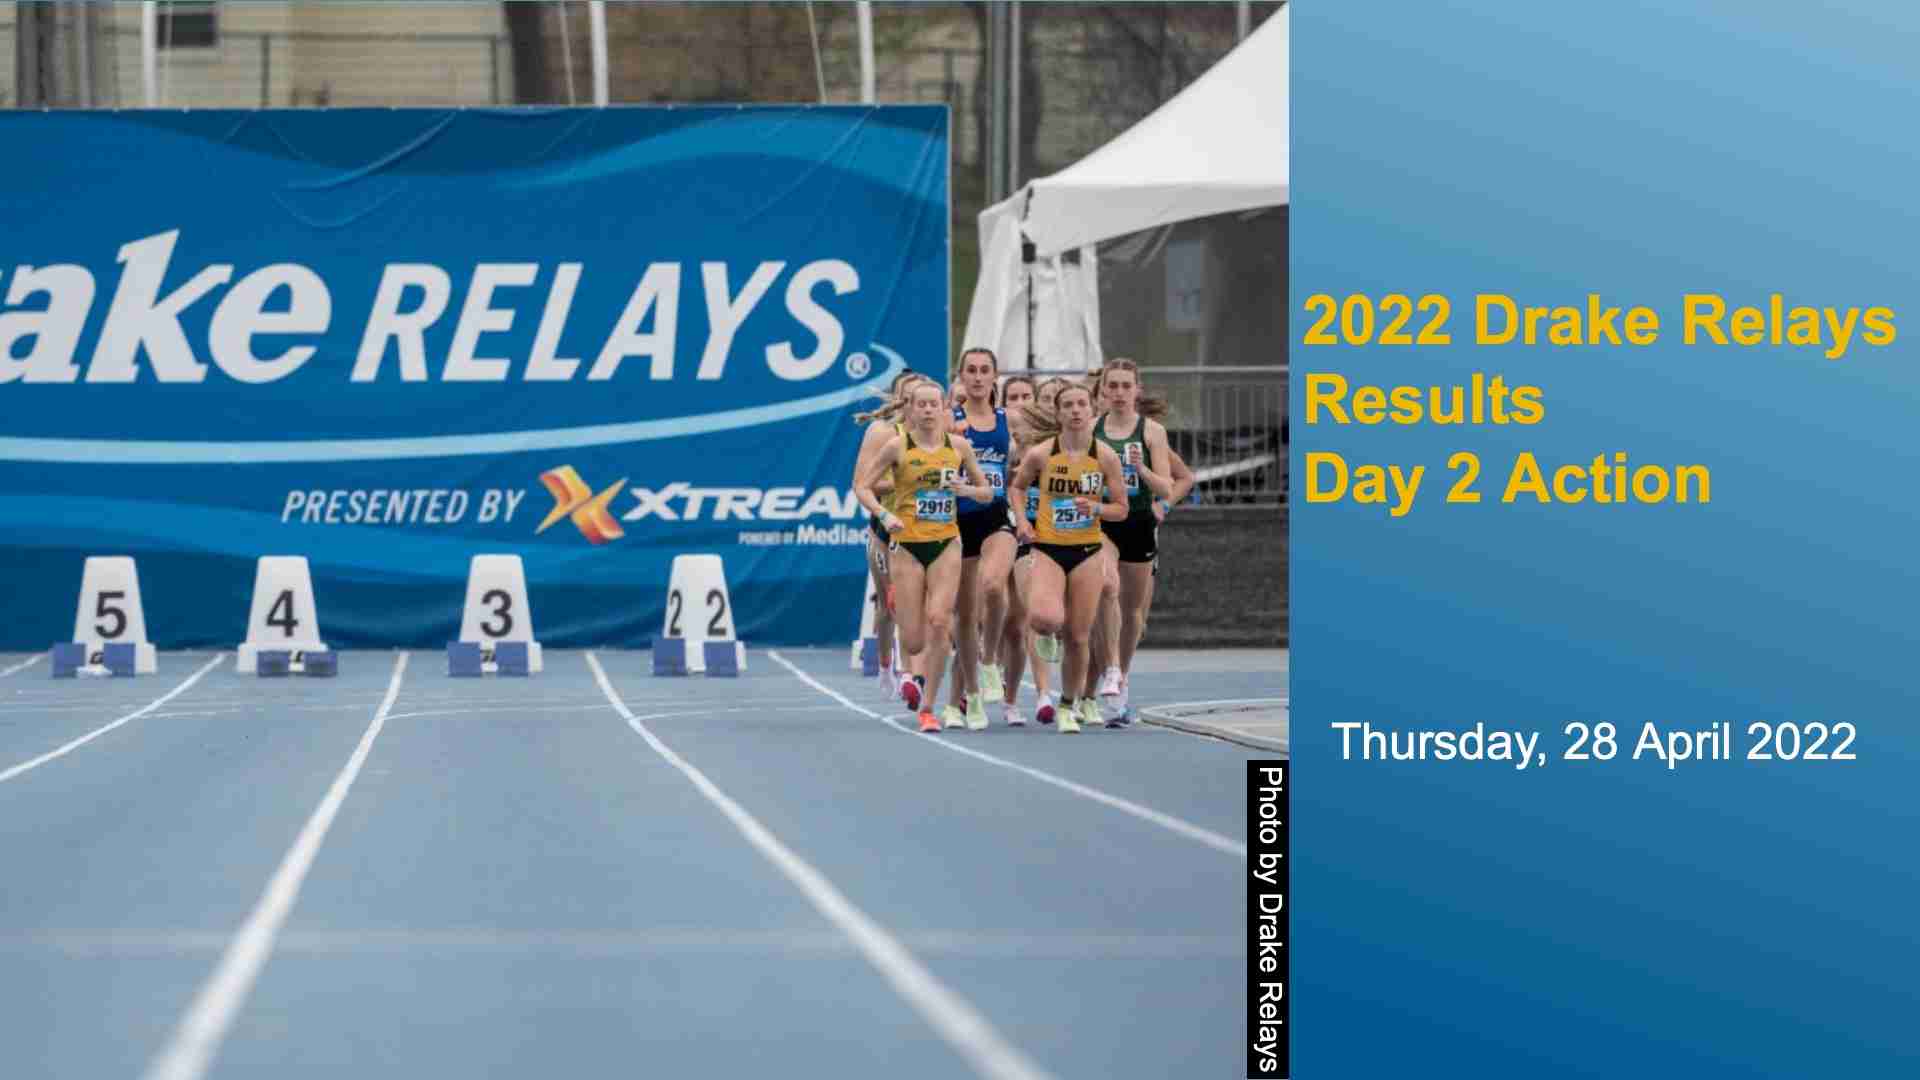 Day 2 Results from the 2022 Drake Relays-April 28